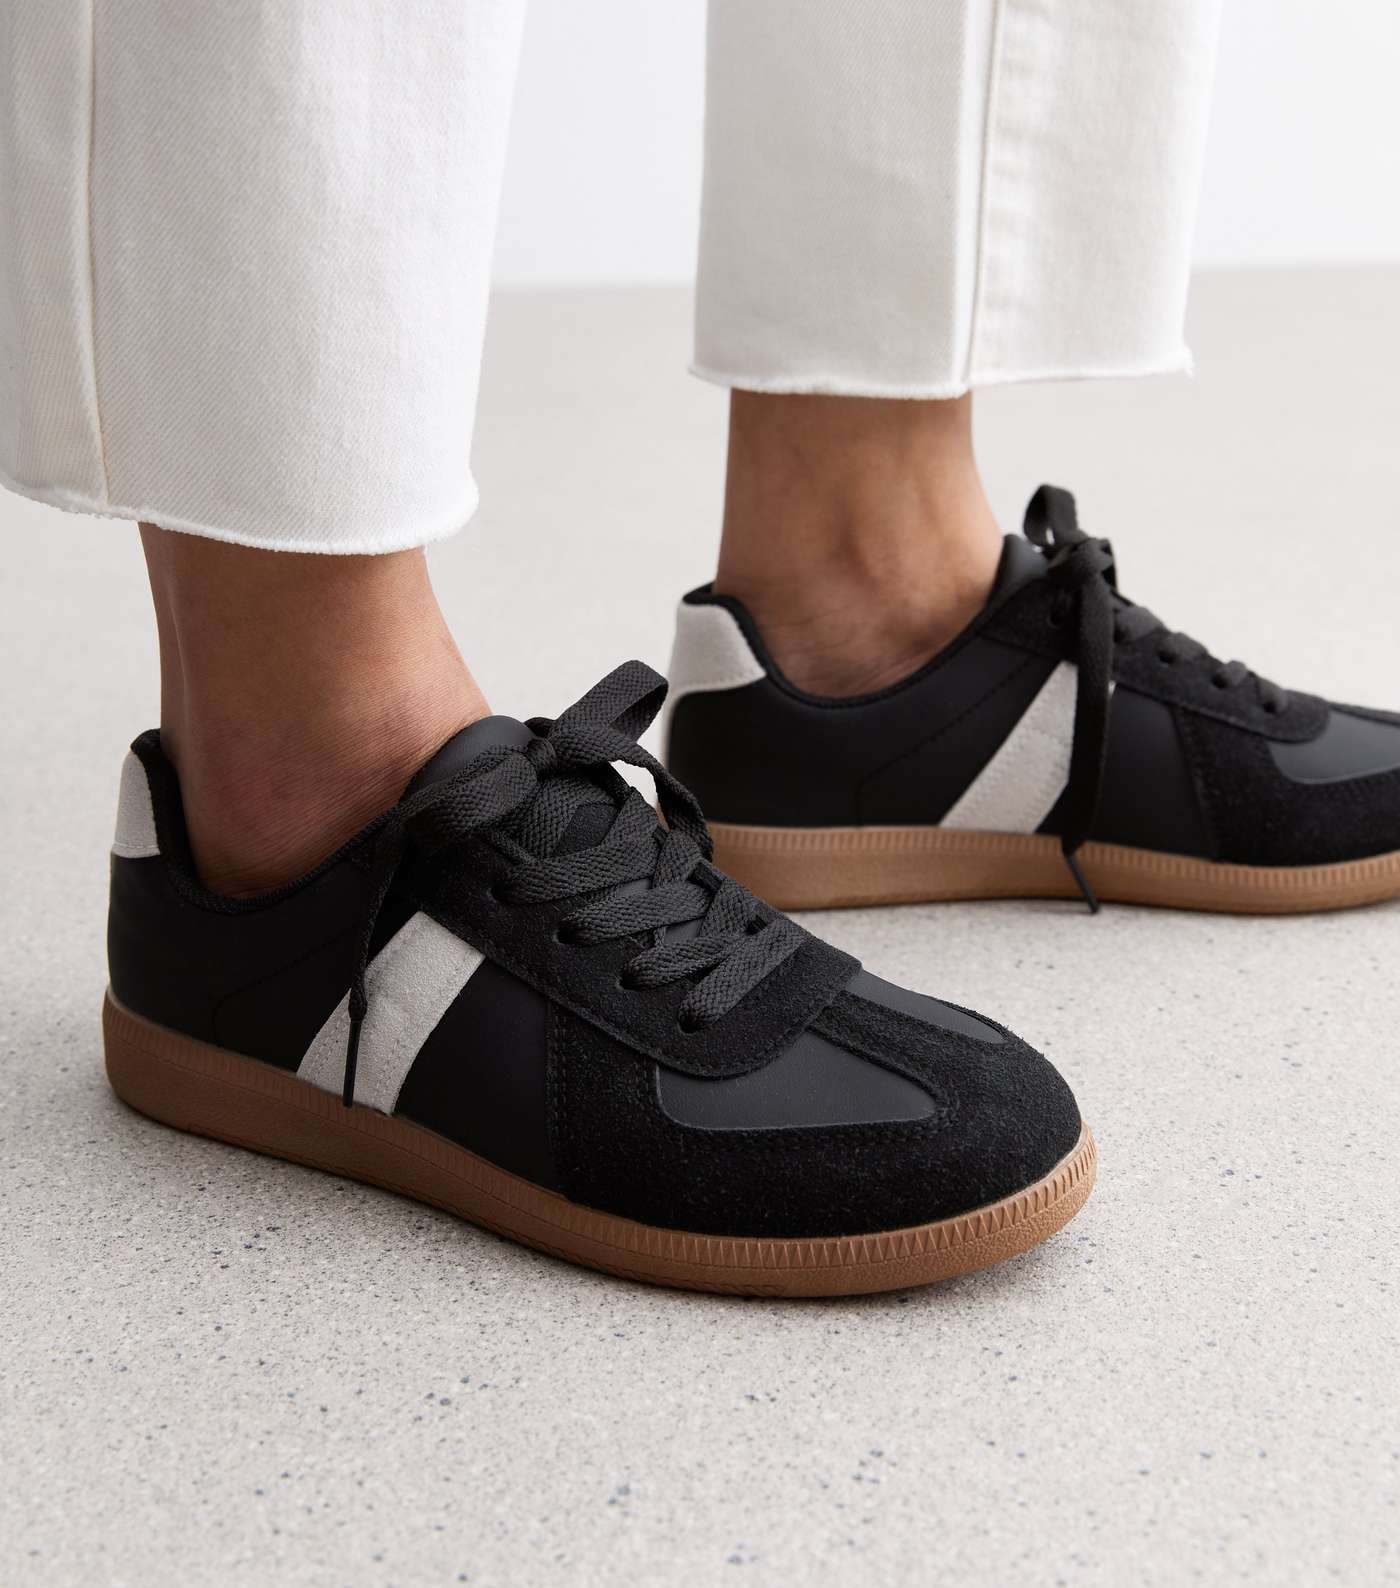 Truffle Black Leather-Look Gum Sole Trainers Image 2